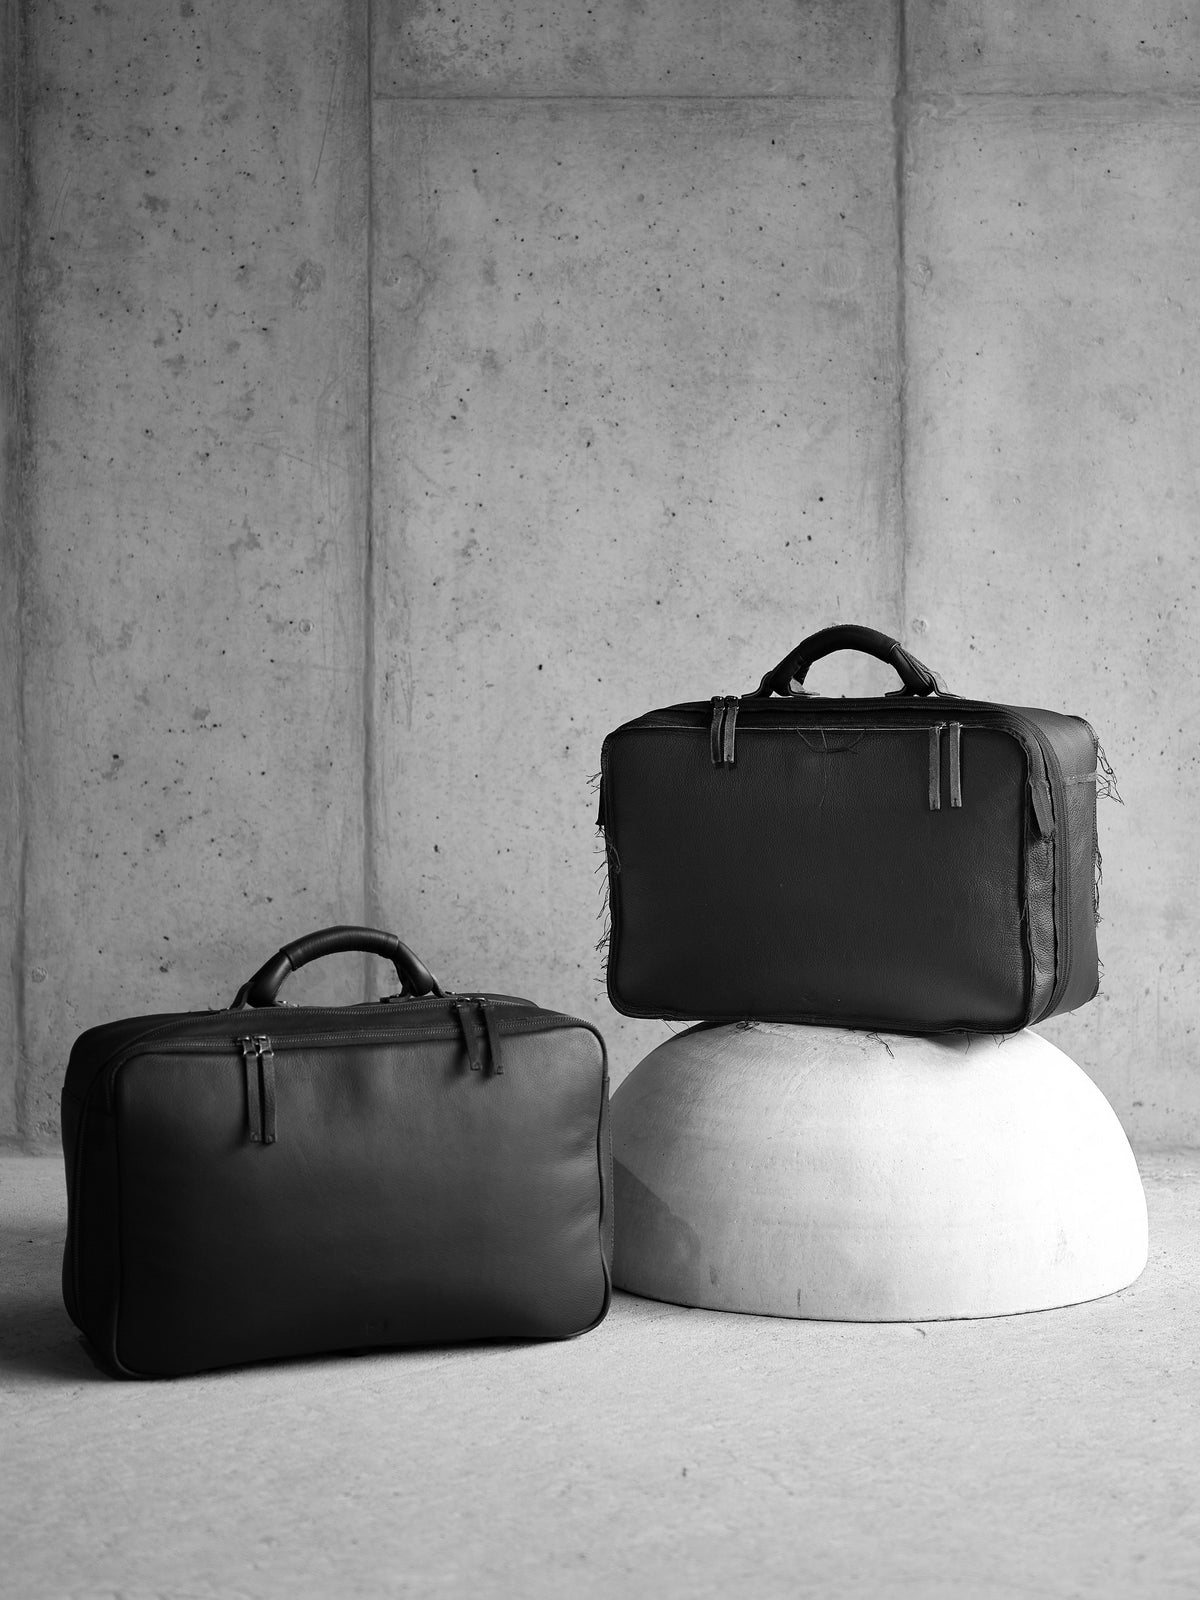 Designer duffle bags by Capra Leather